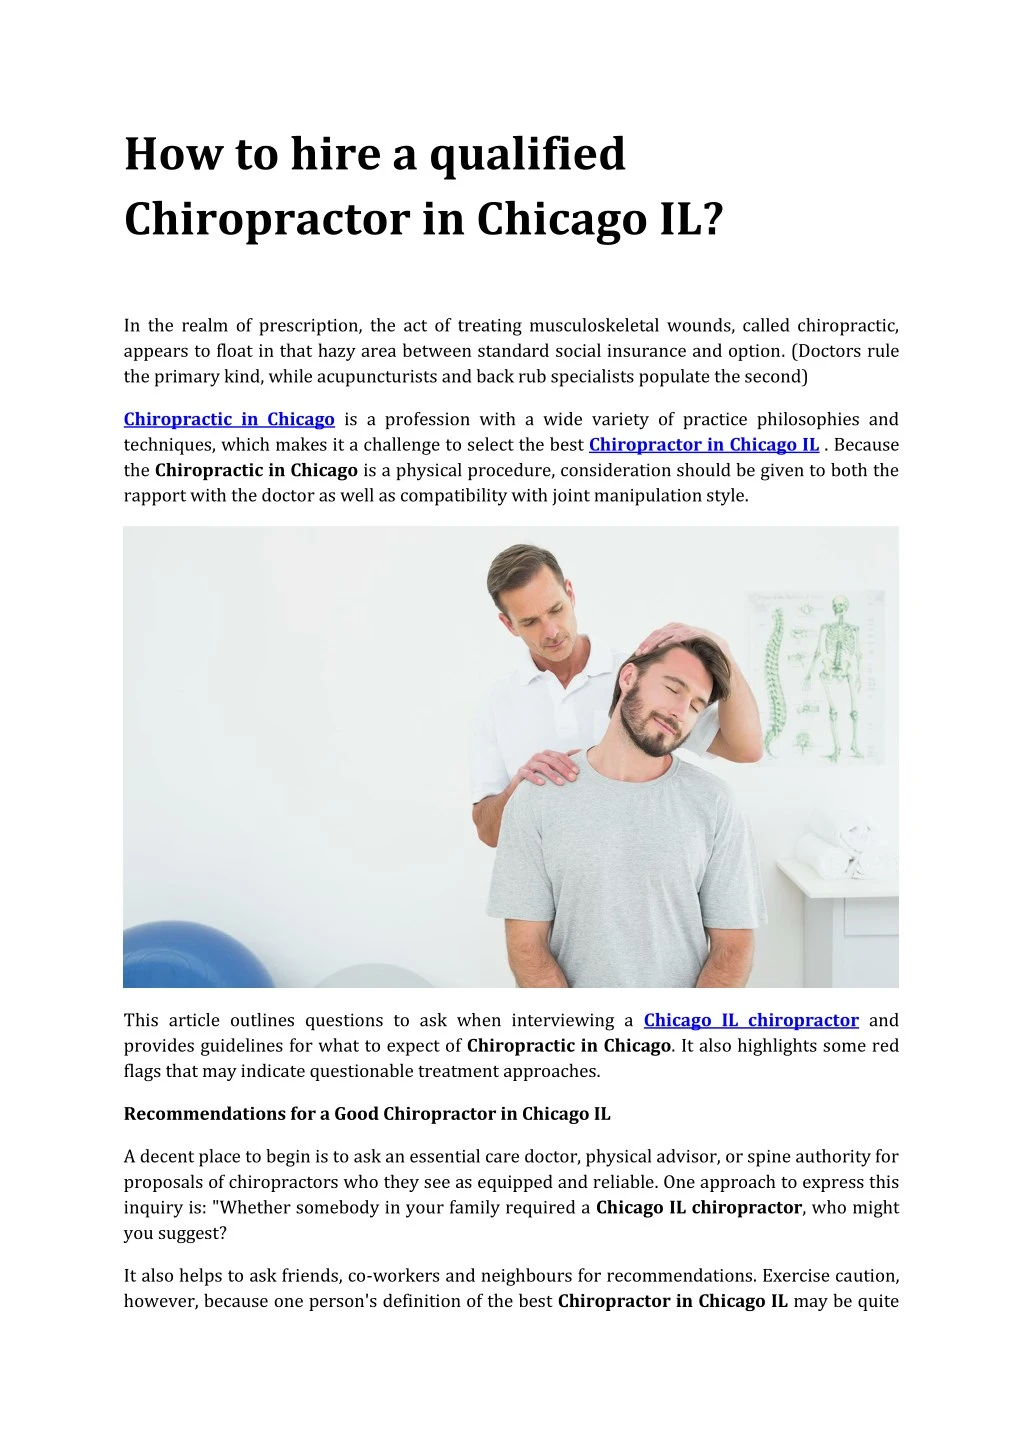 how to hire a qualified chiropractor in chicago il